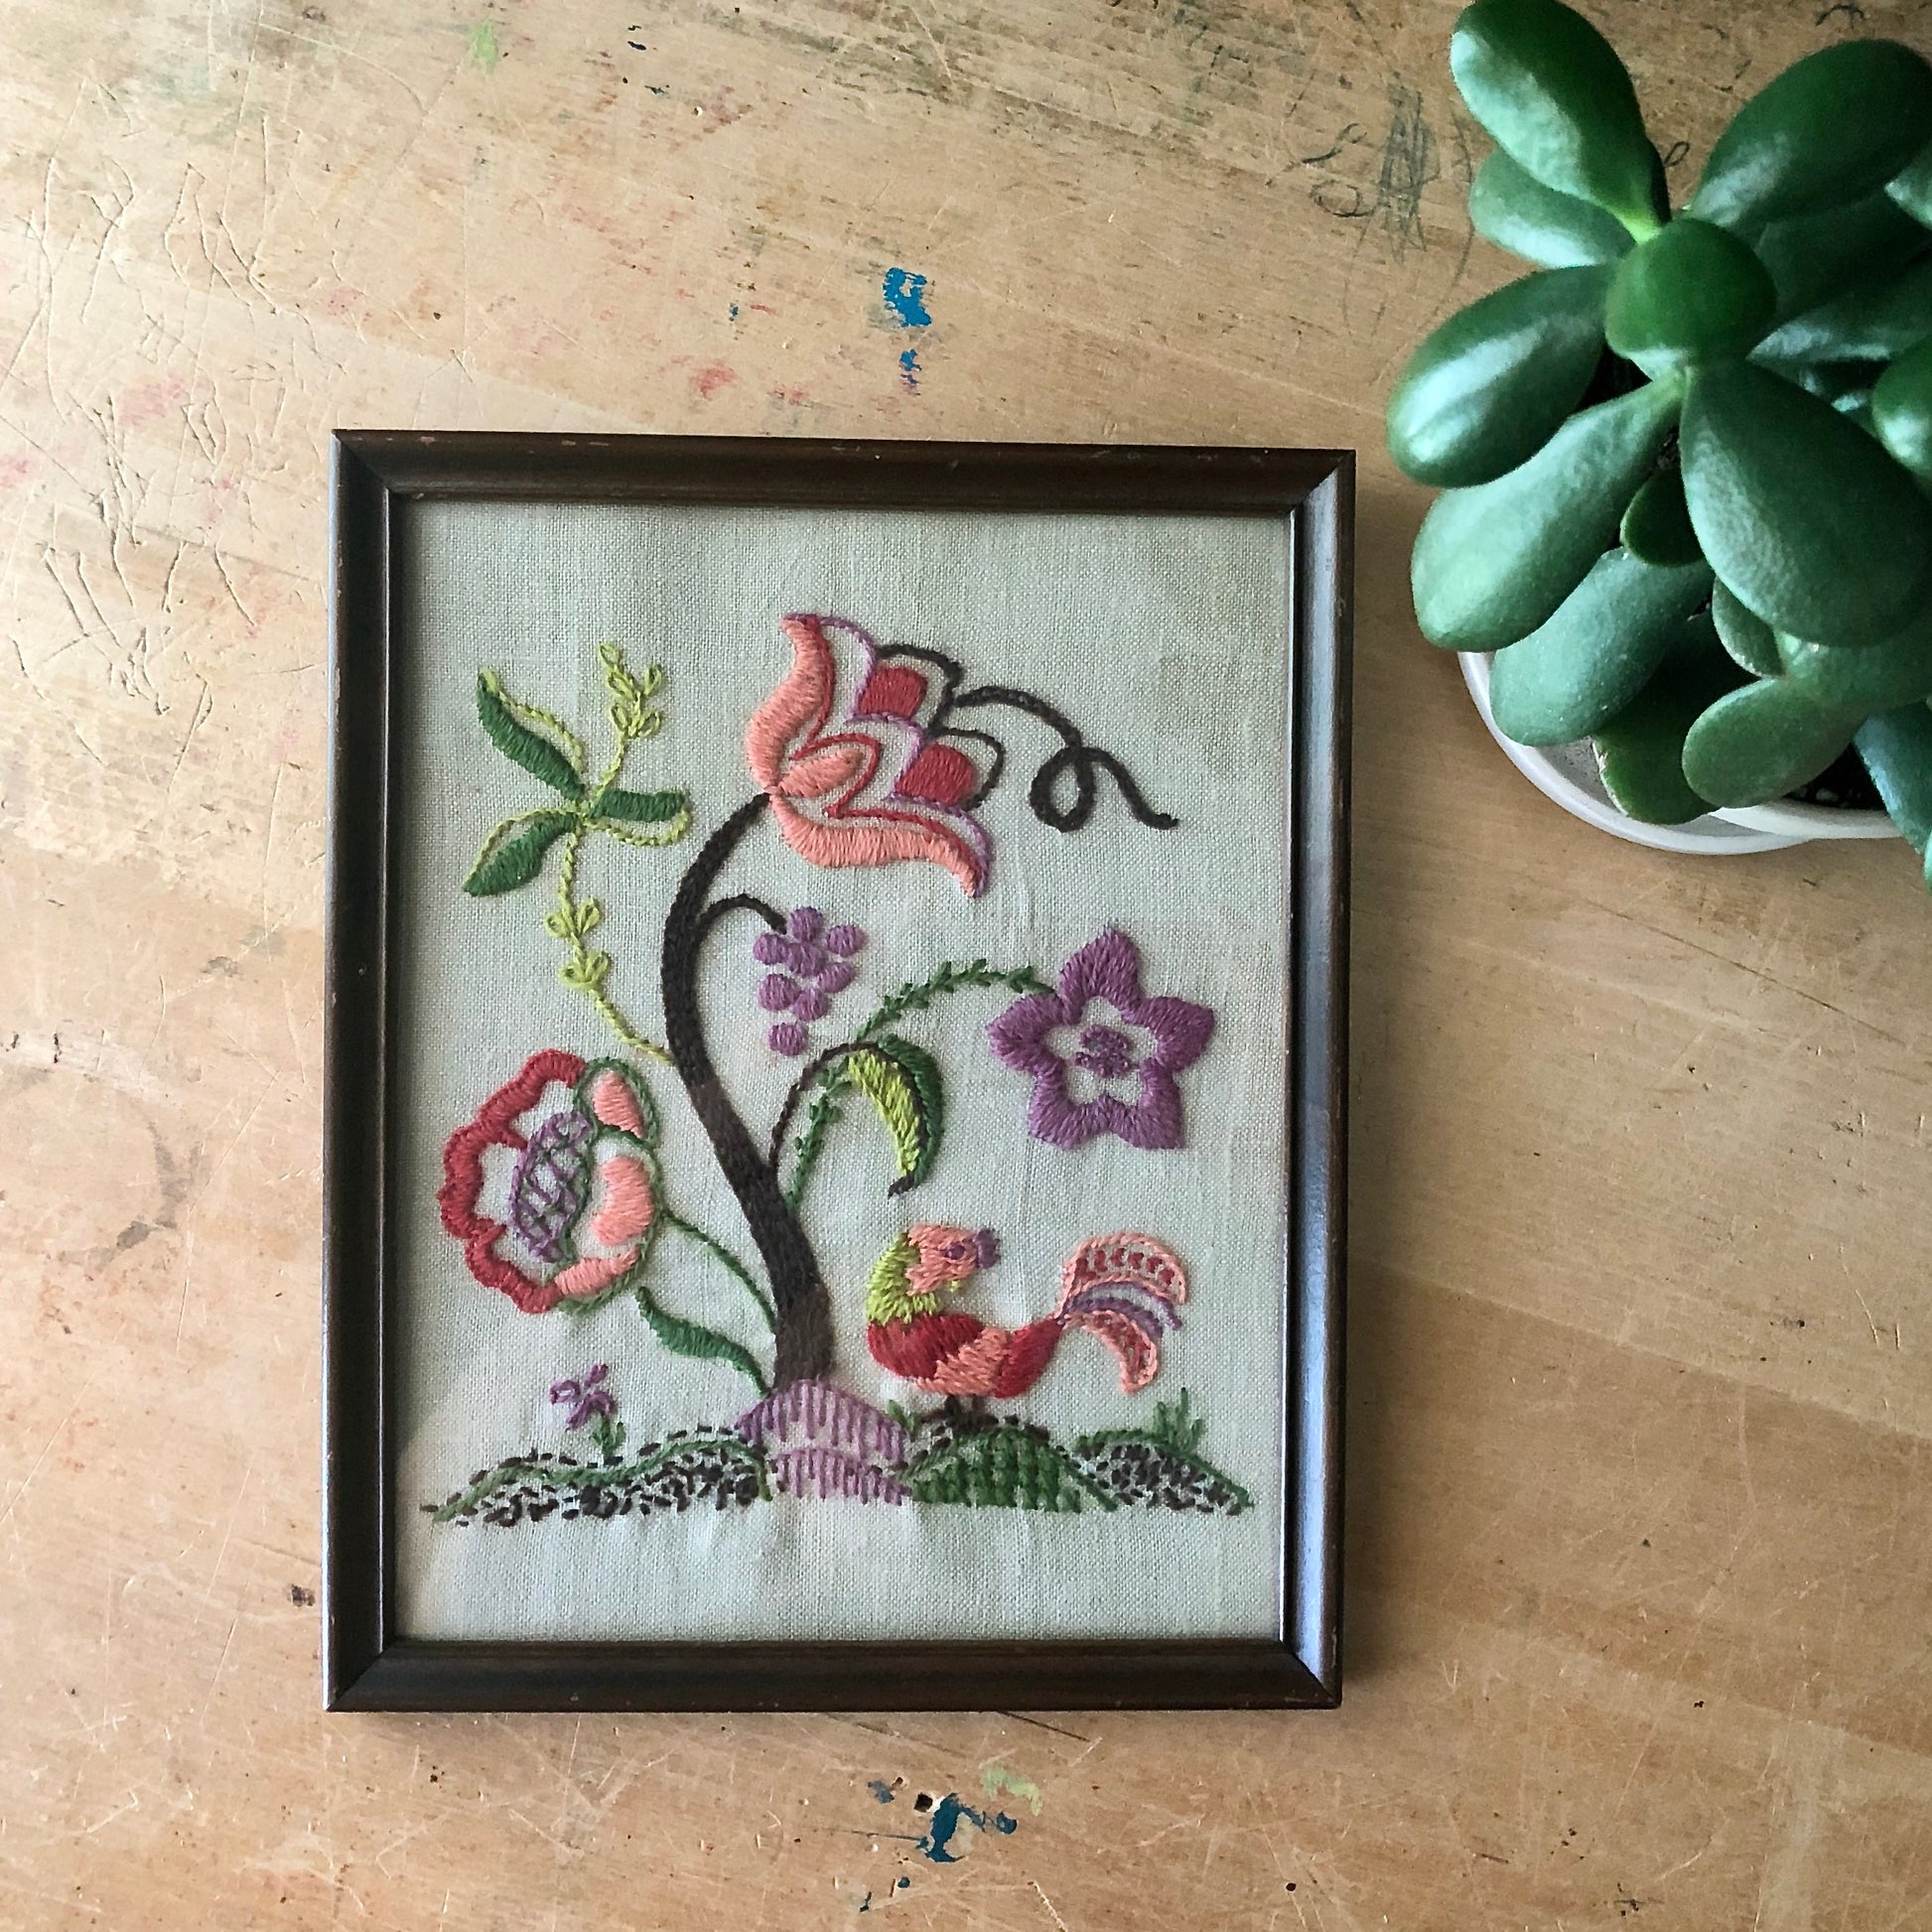 Framed Floral Crewel Embroidery (c.1970s)